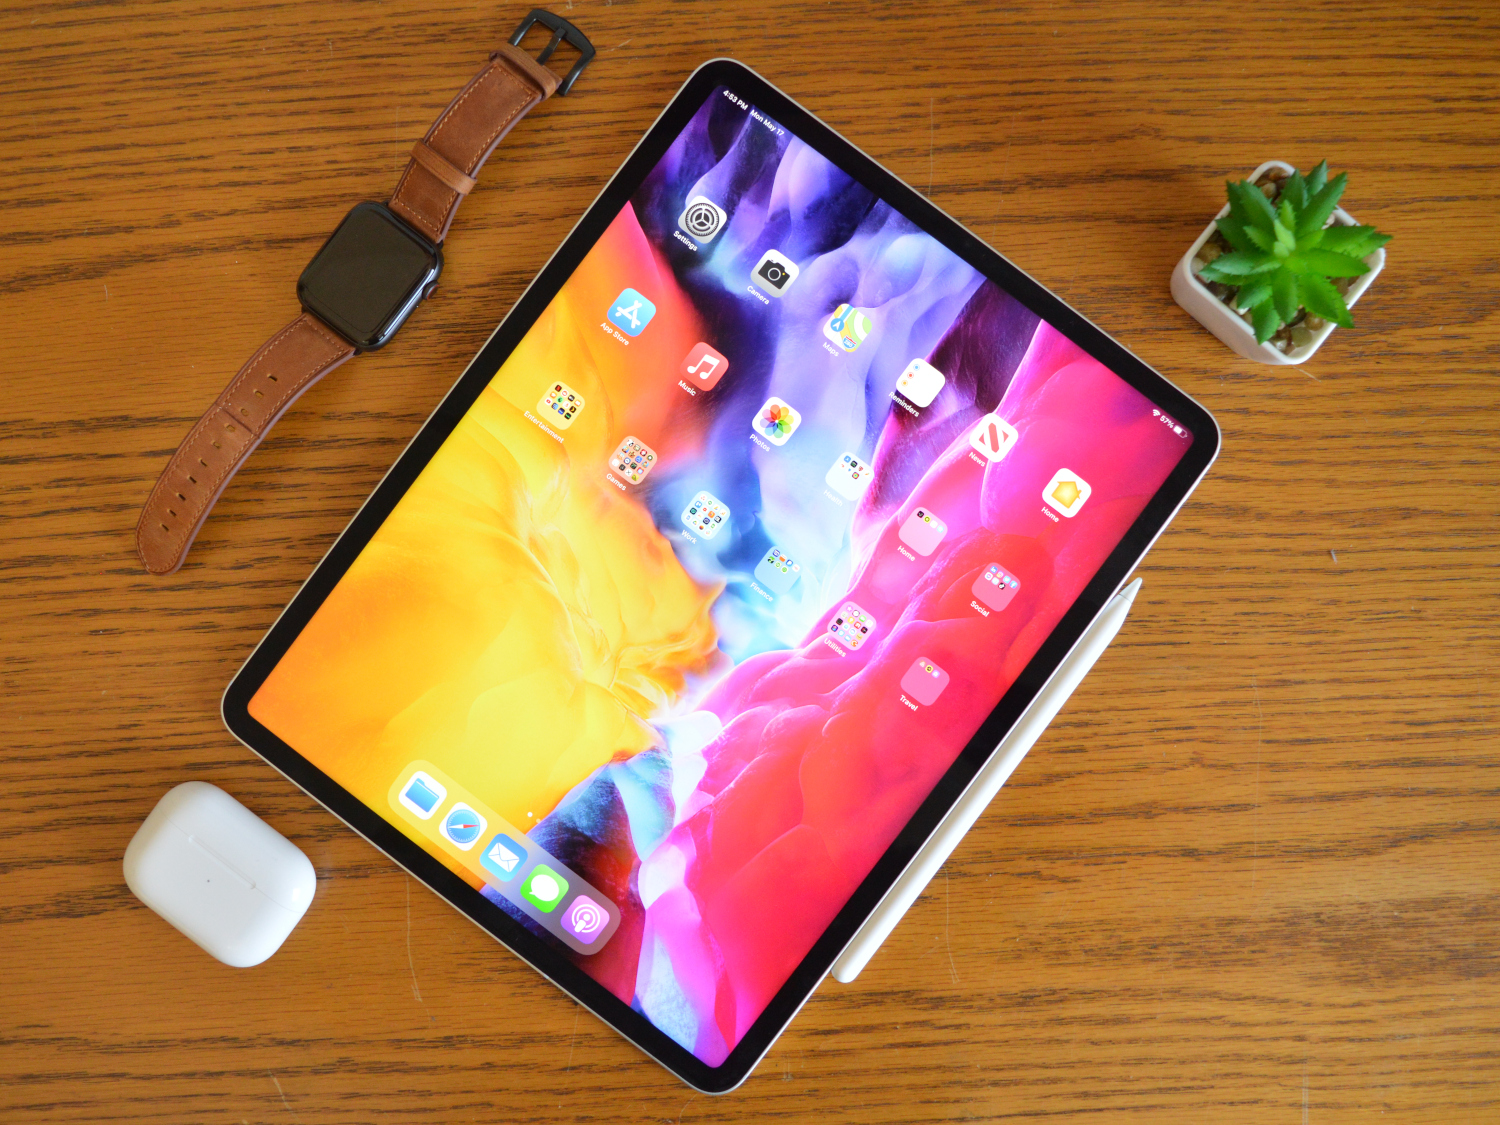 Apple M1 iPad Pro (12.9-Inch) Review: Future-Proofed